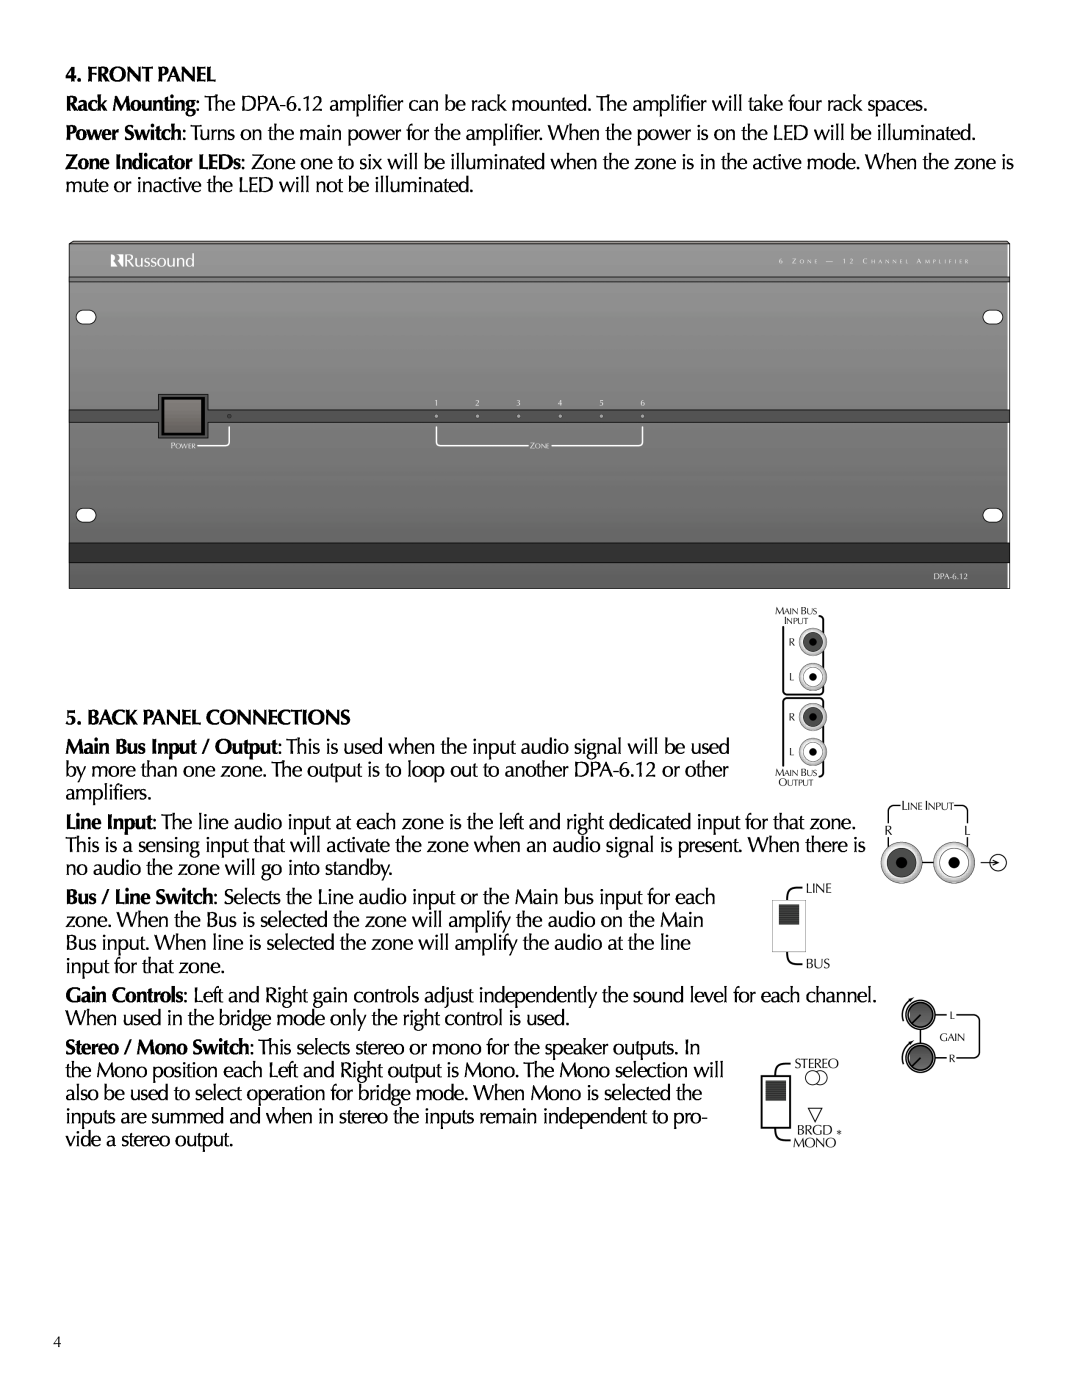 Russound DPA-6.12 instruction manual Front Panel, Back Panel Connections 